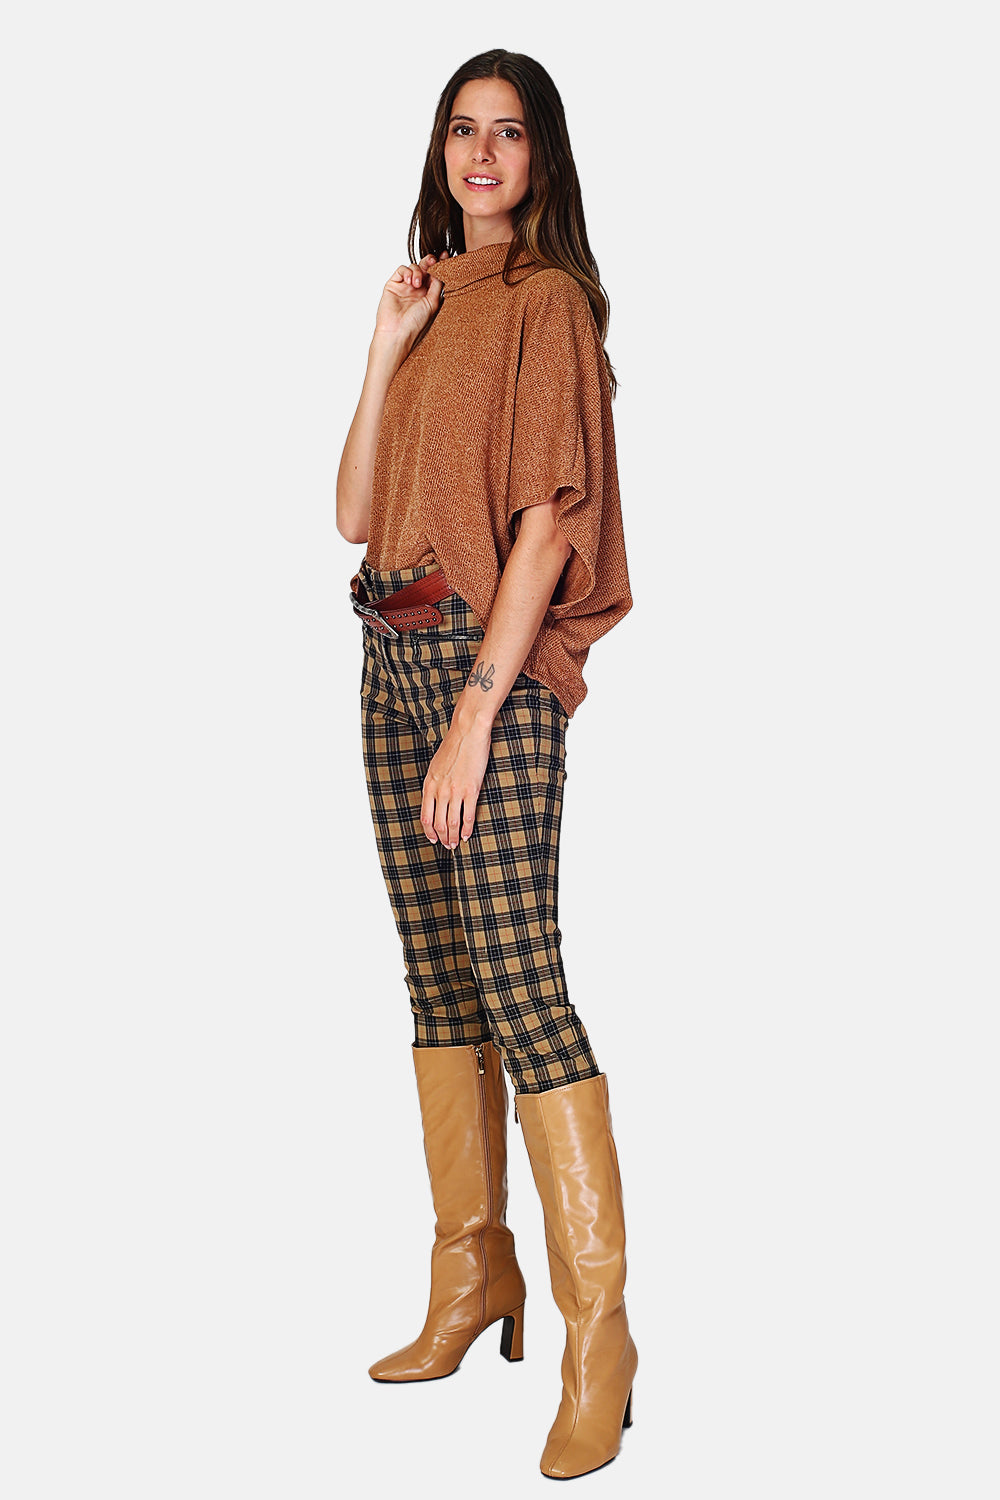 Roll neck poncho sweater with 3/4 sleeves